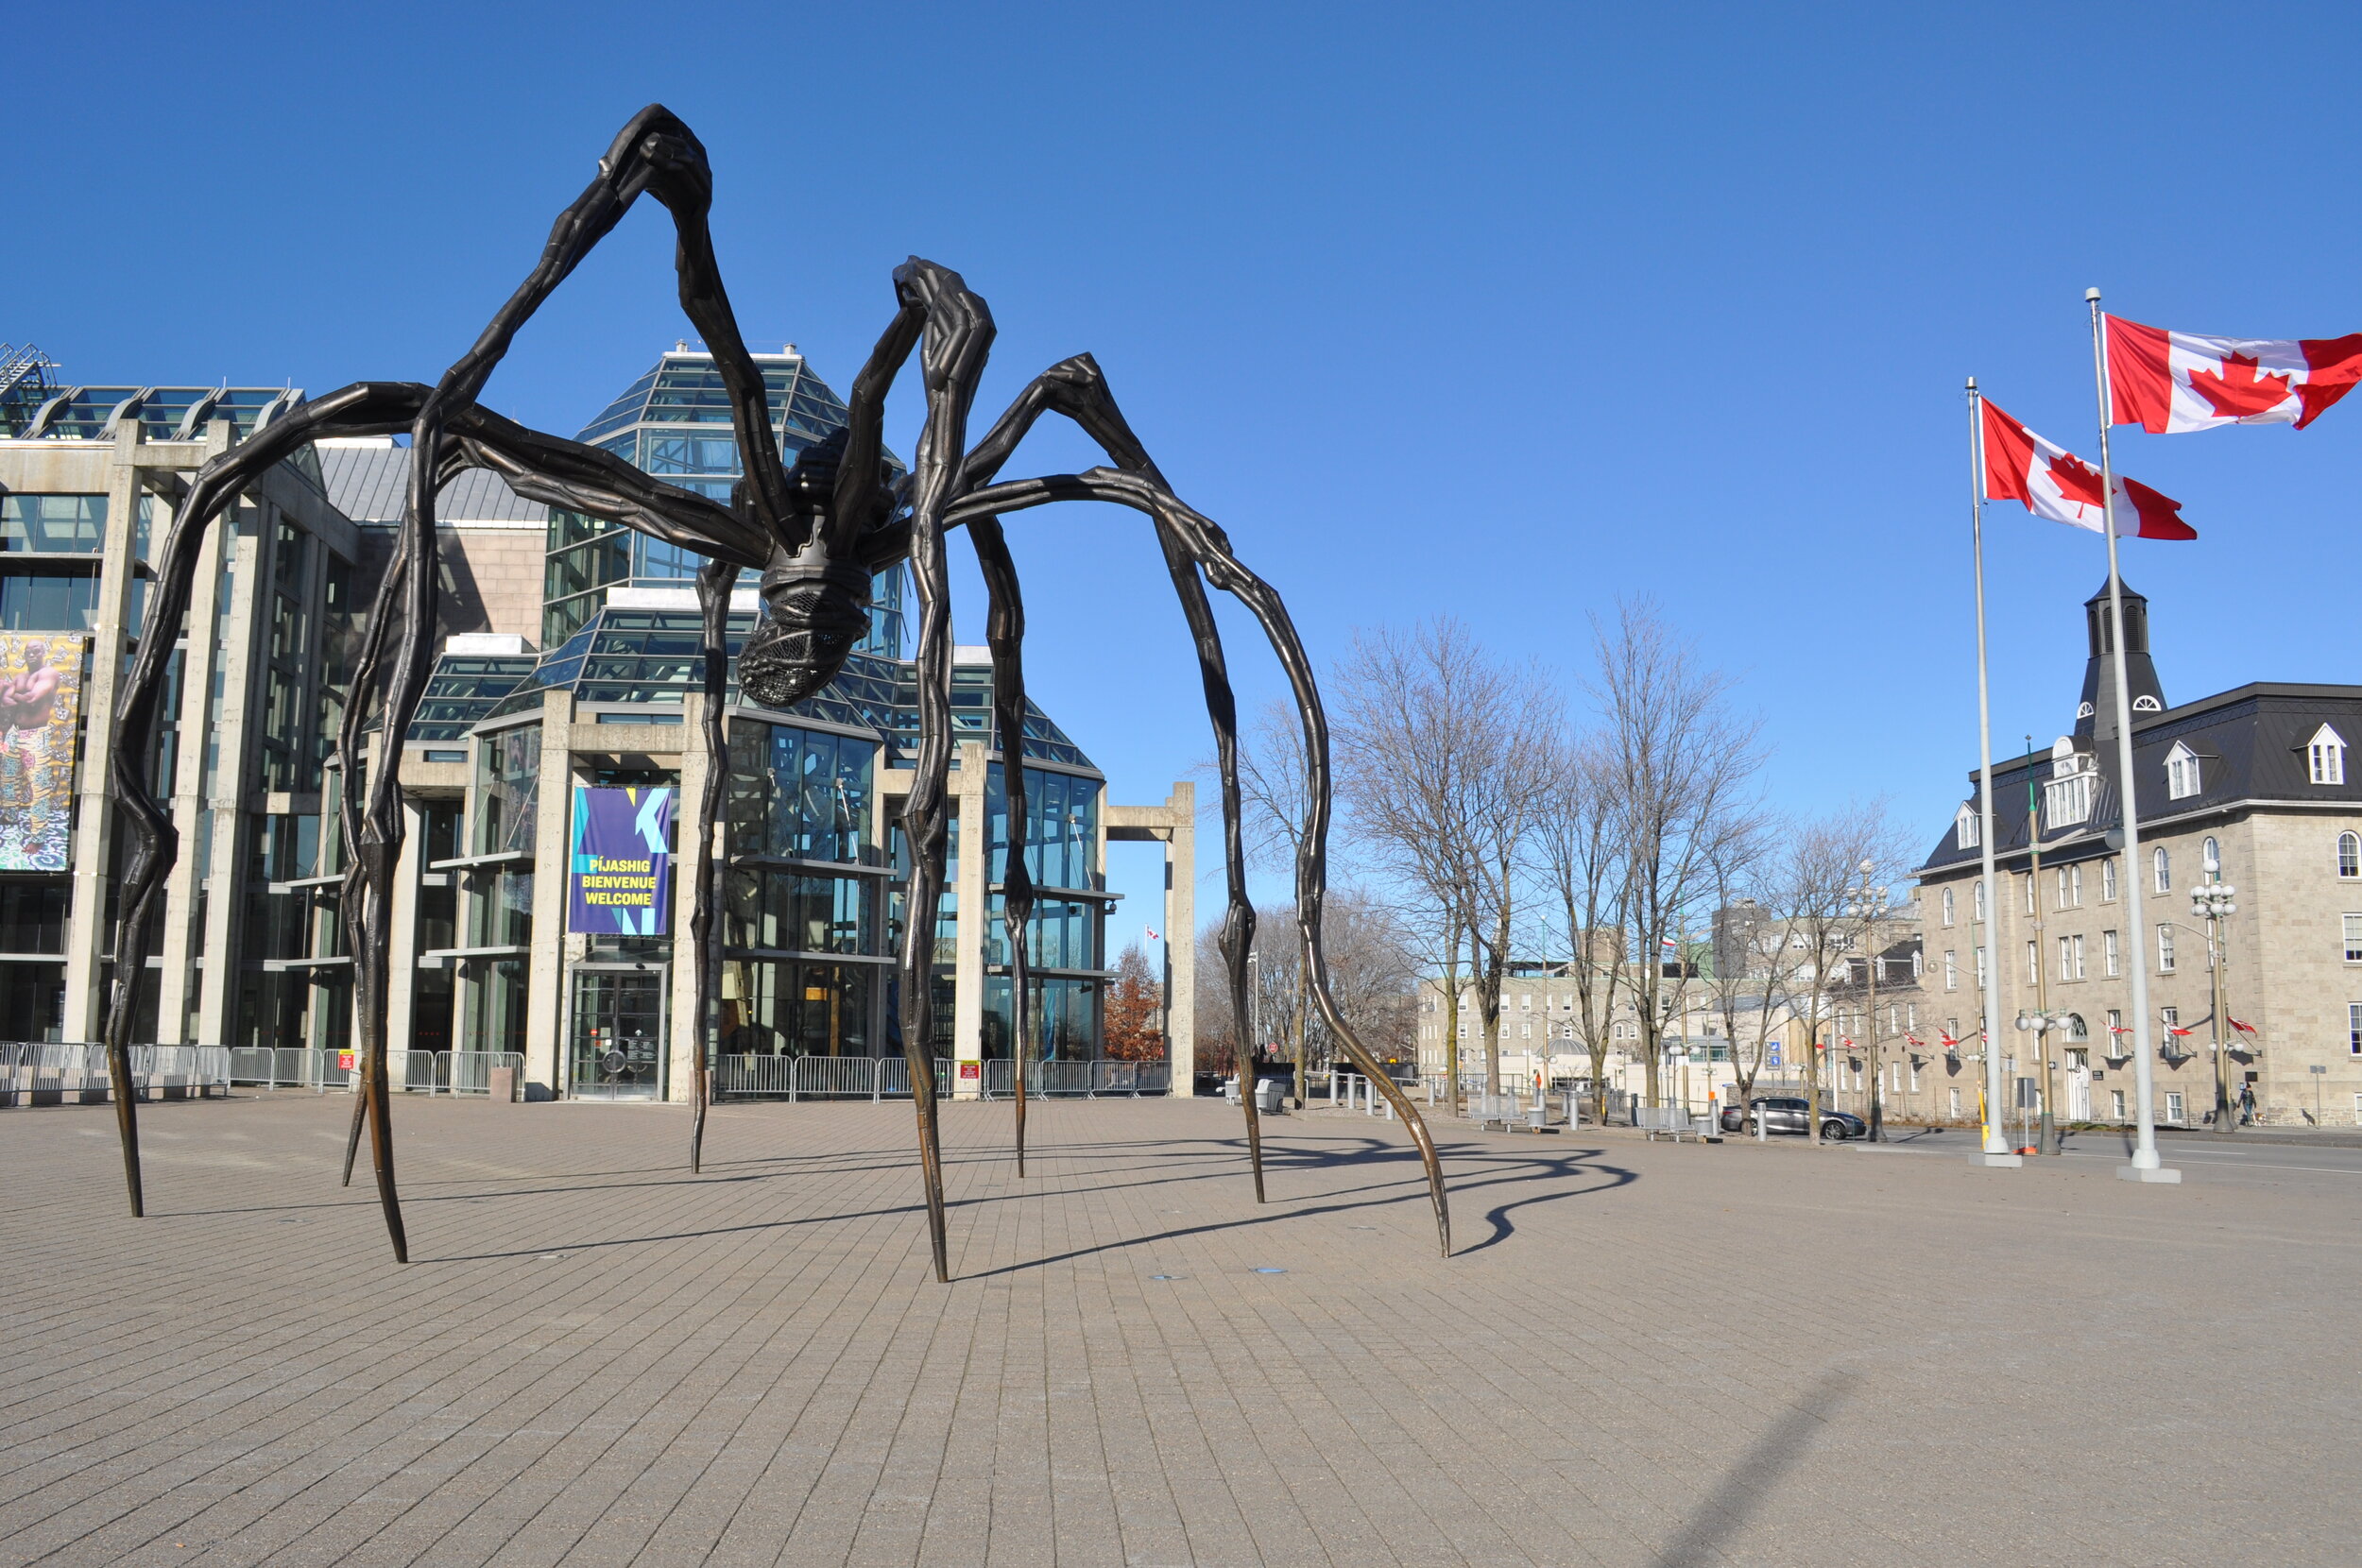 Giant spider sculpture at the National Art Gallery museum in Ottawa